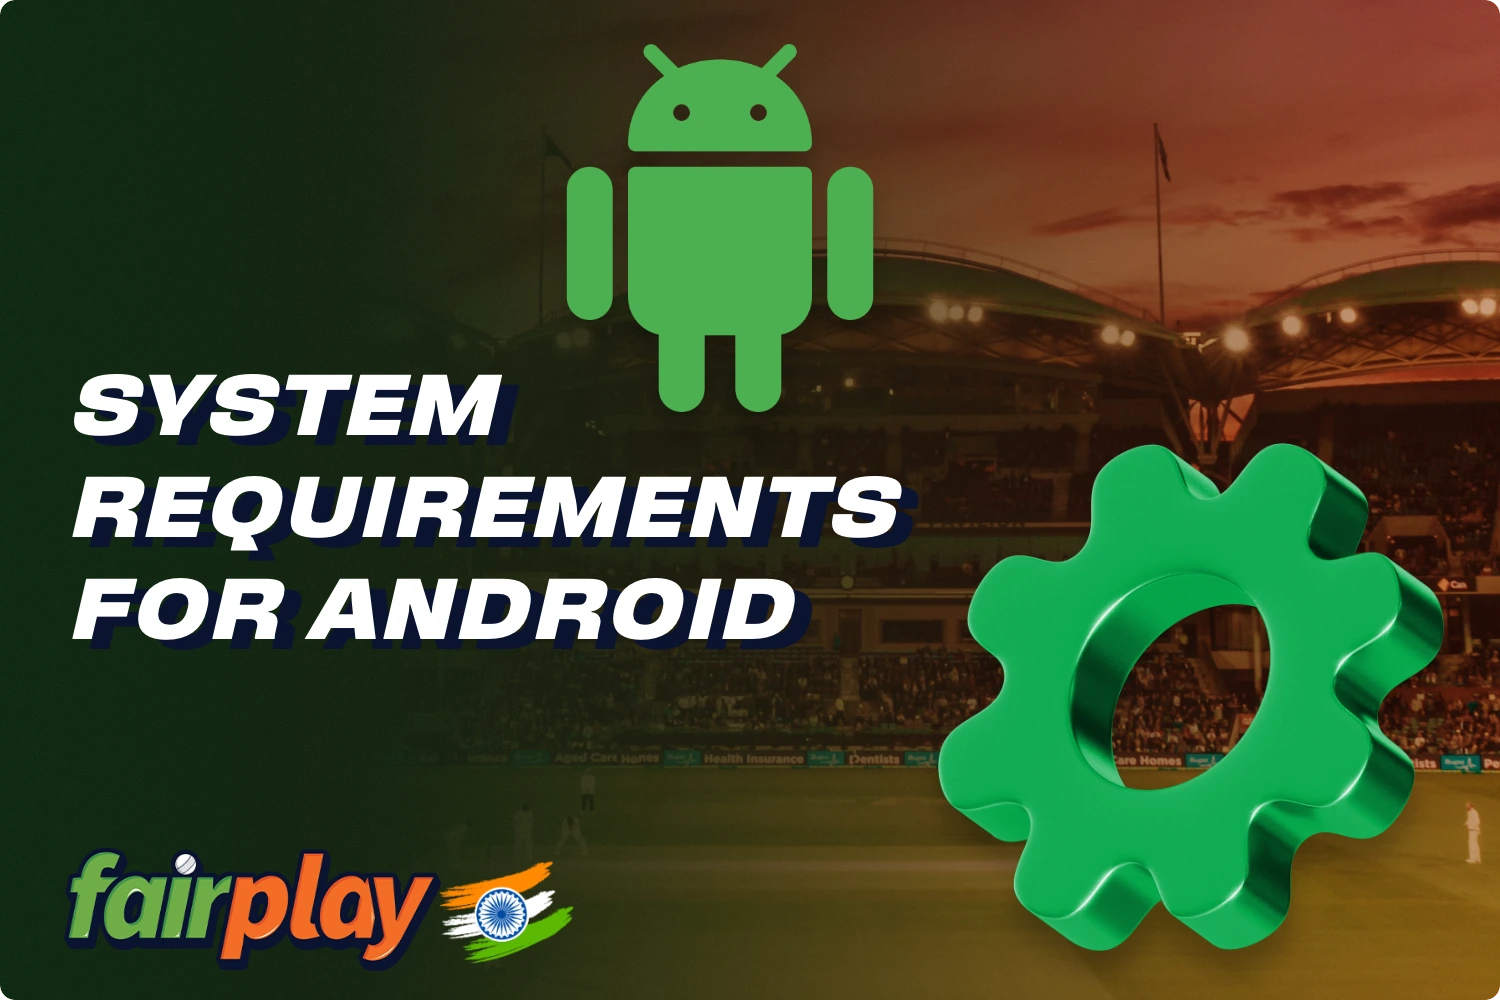 The Fairplay mobile app has minimum requirements for Android devices